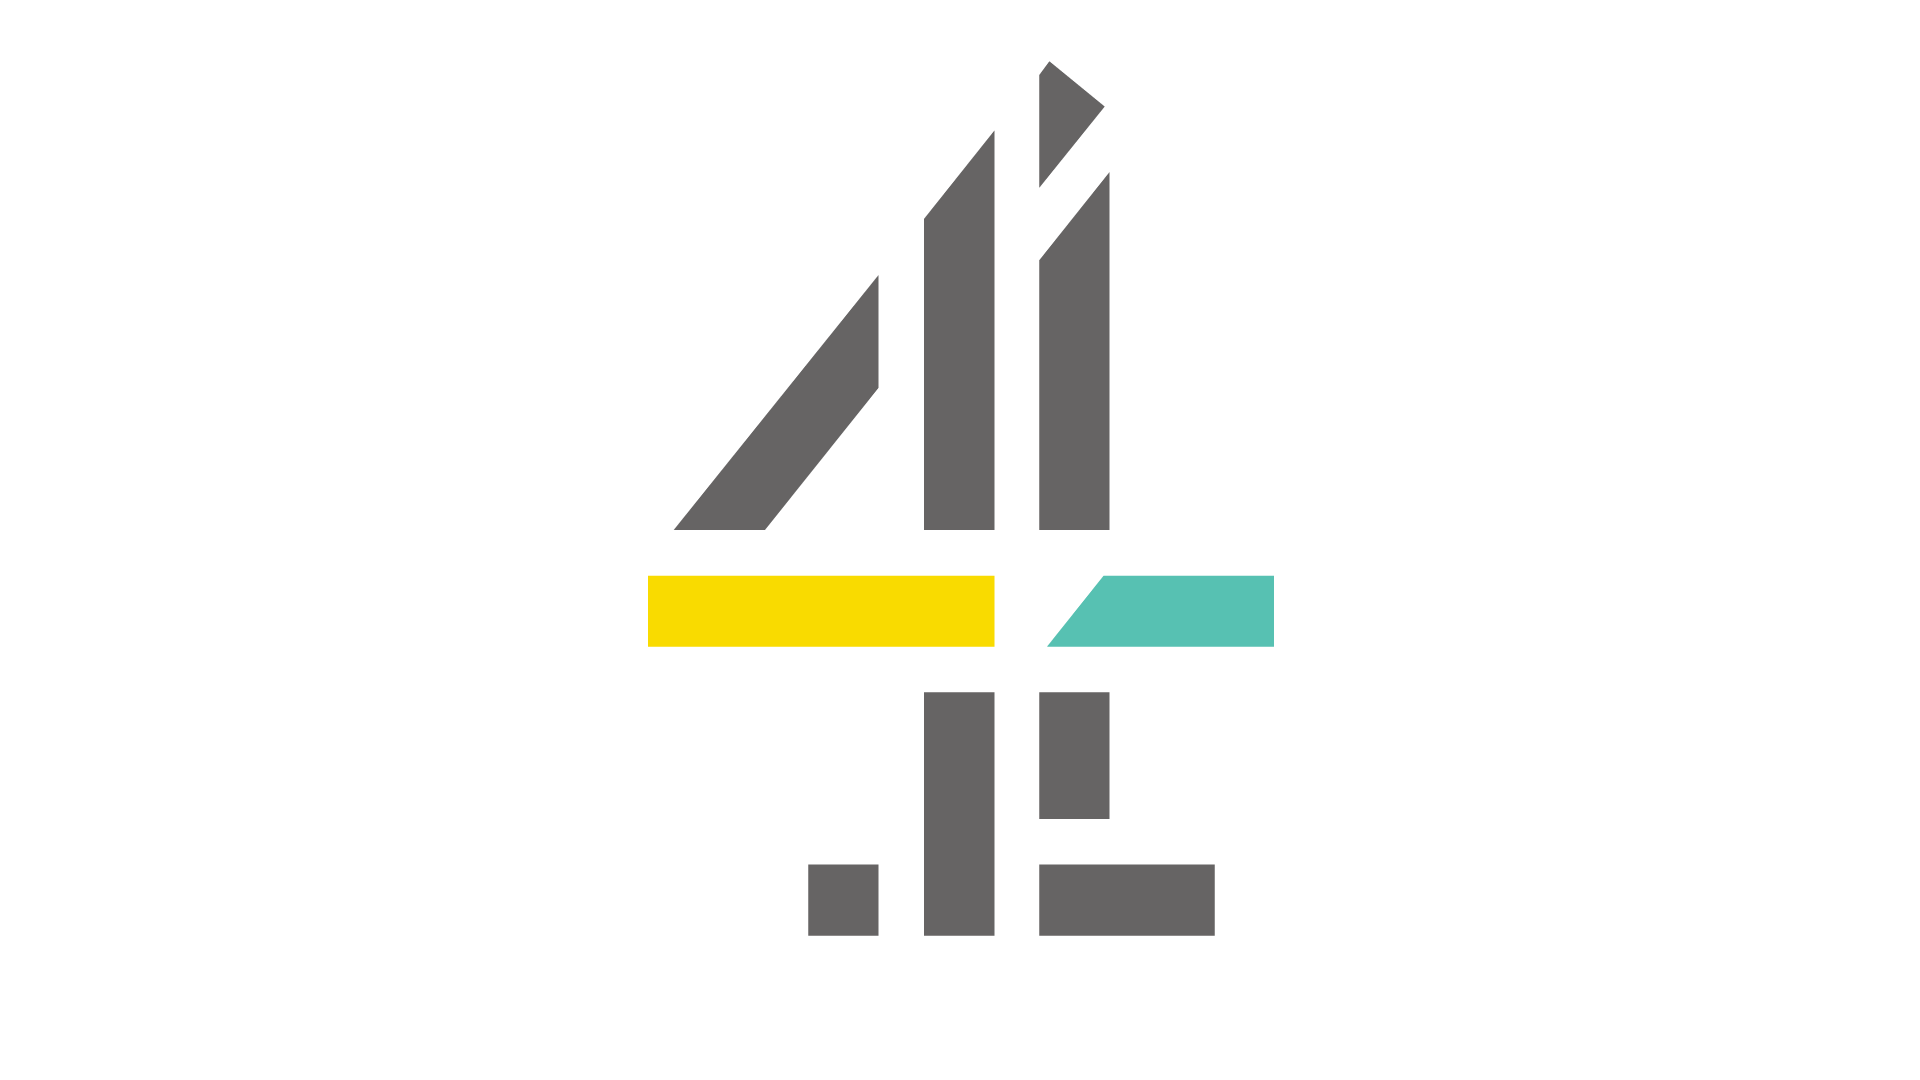 SoA urges government to stop the privatisation of Channel 4